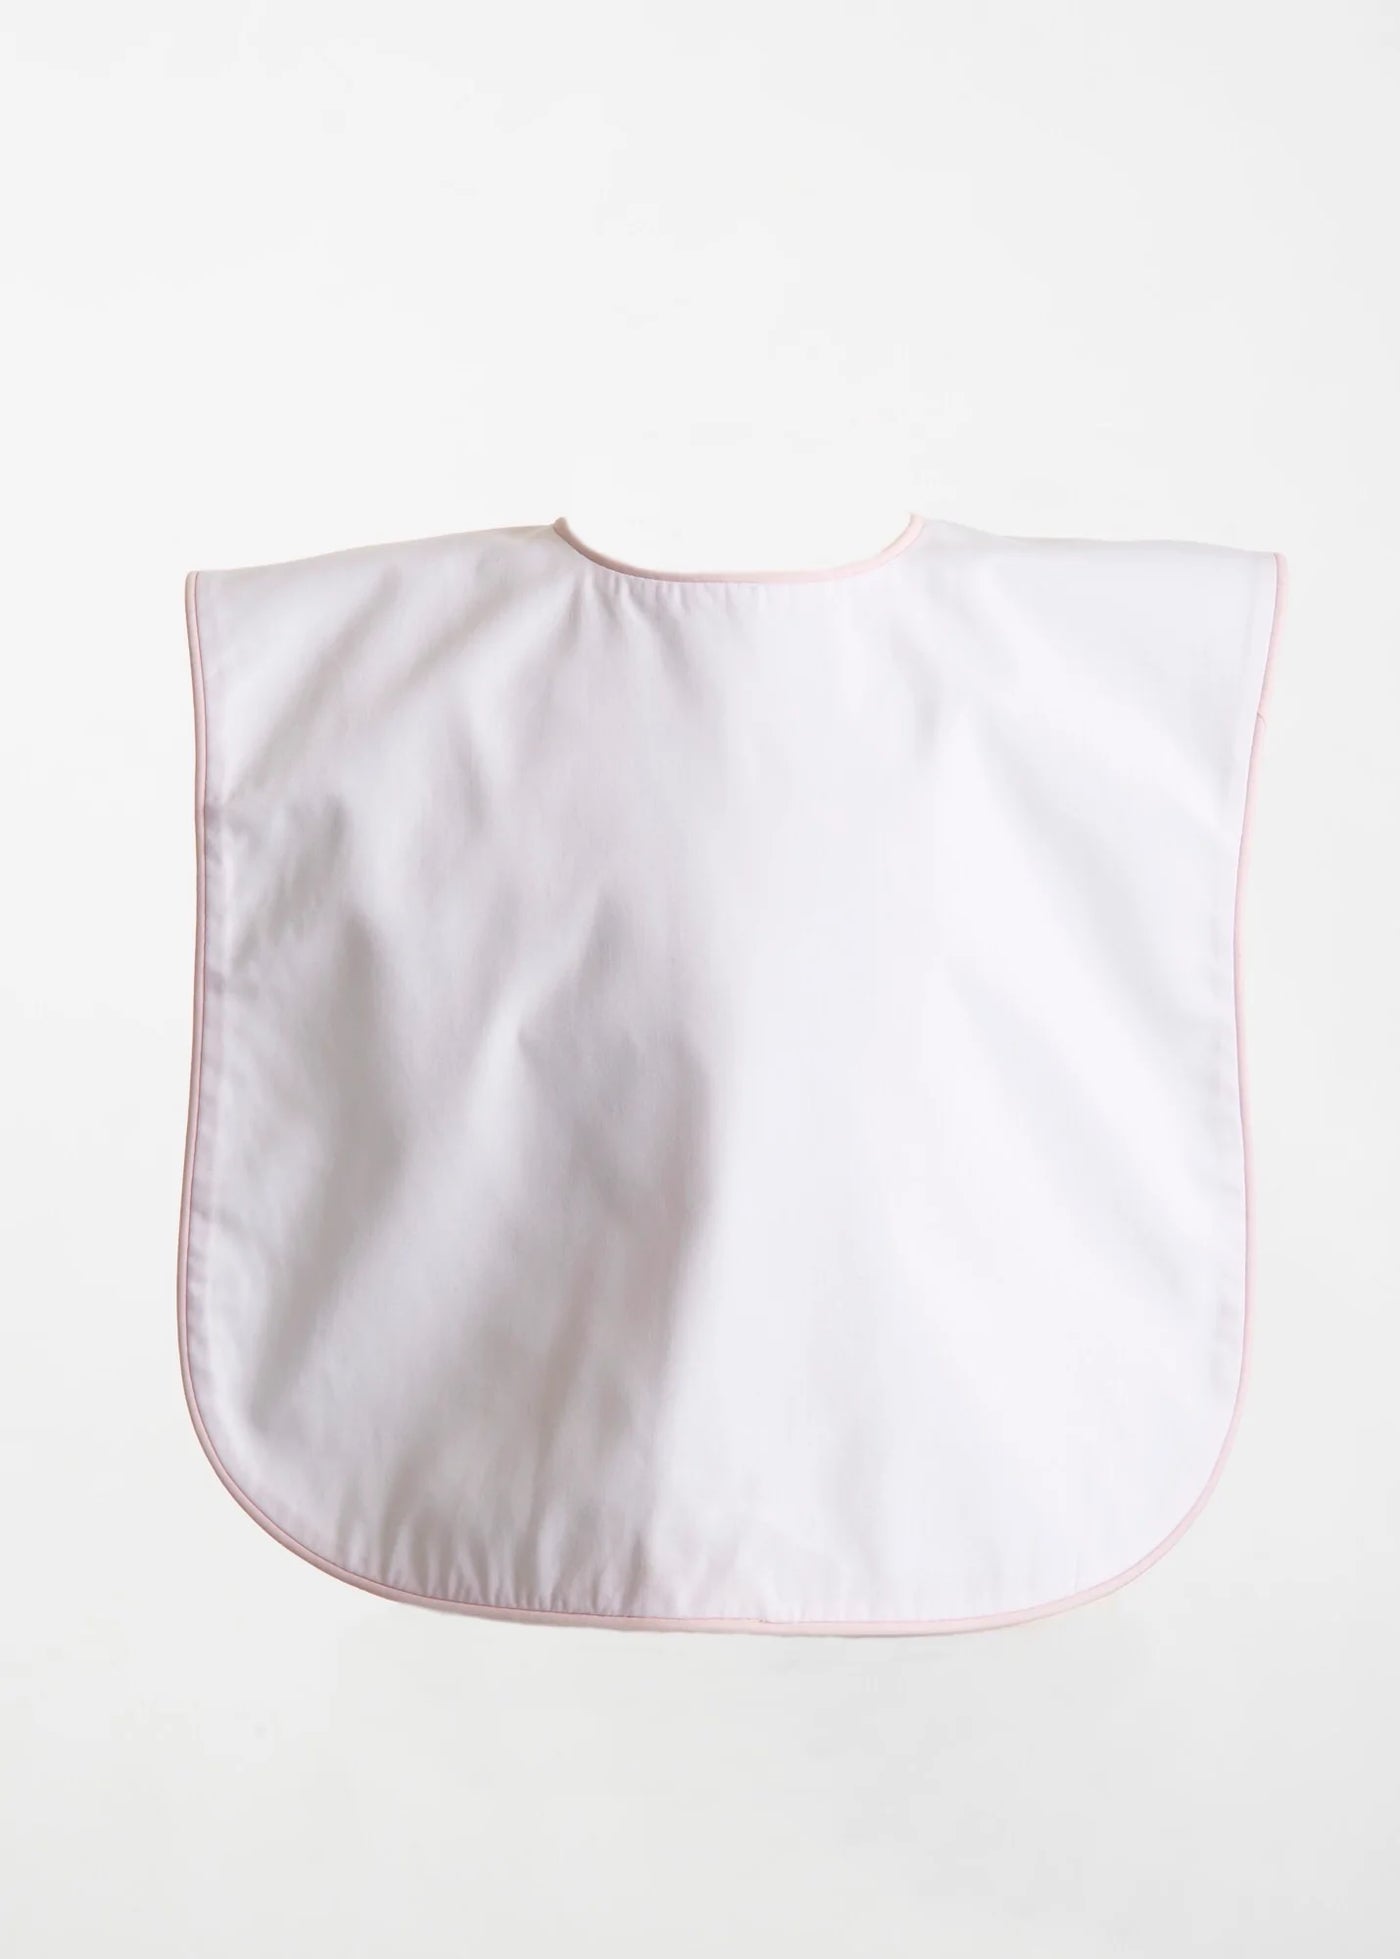 White Oversized Bib with Pink Piping